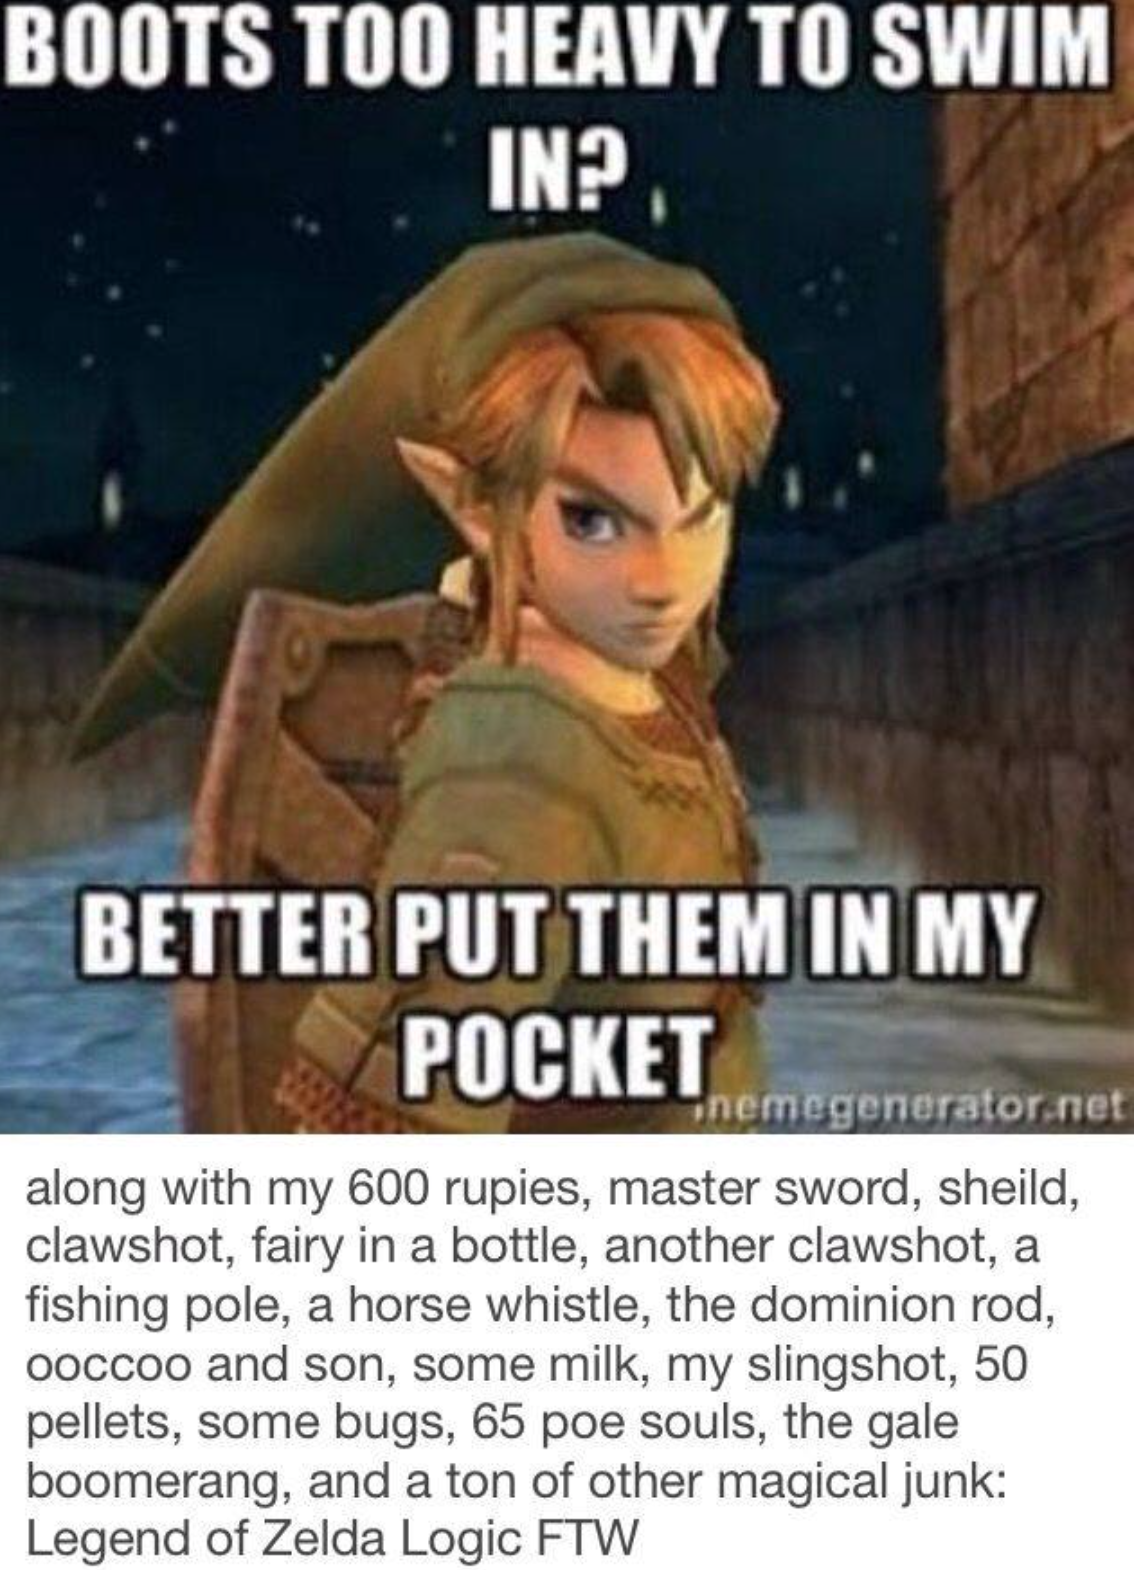 legend of zelda twilight princess - Boots Too Heavy To Swim In? Better Put Them In My Pocket. nemegenerator.net along with my 600 rupies, master sword, sheild, clawshot, fairy in a bottle, another clawshot, a fishing pole, a horse whistle, the dominion ro